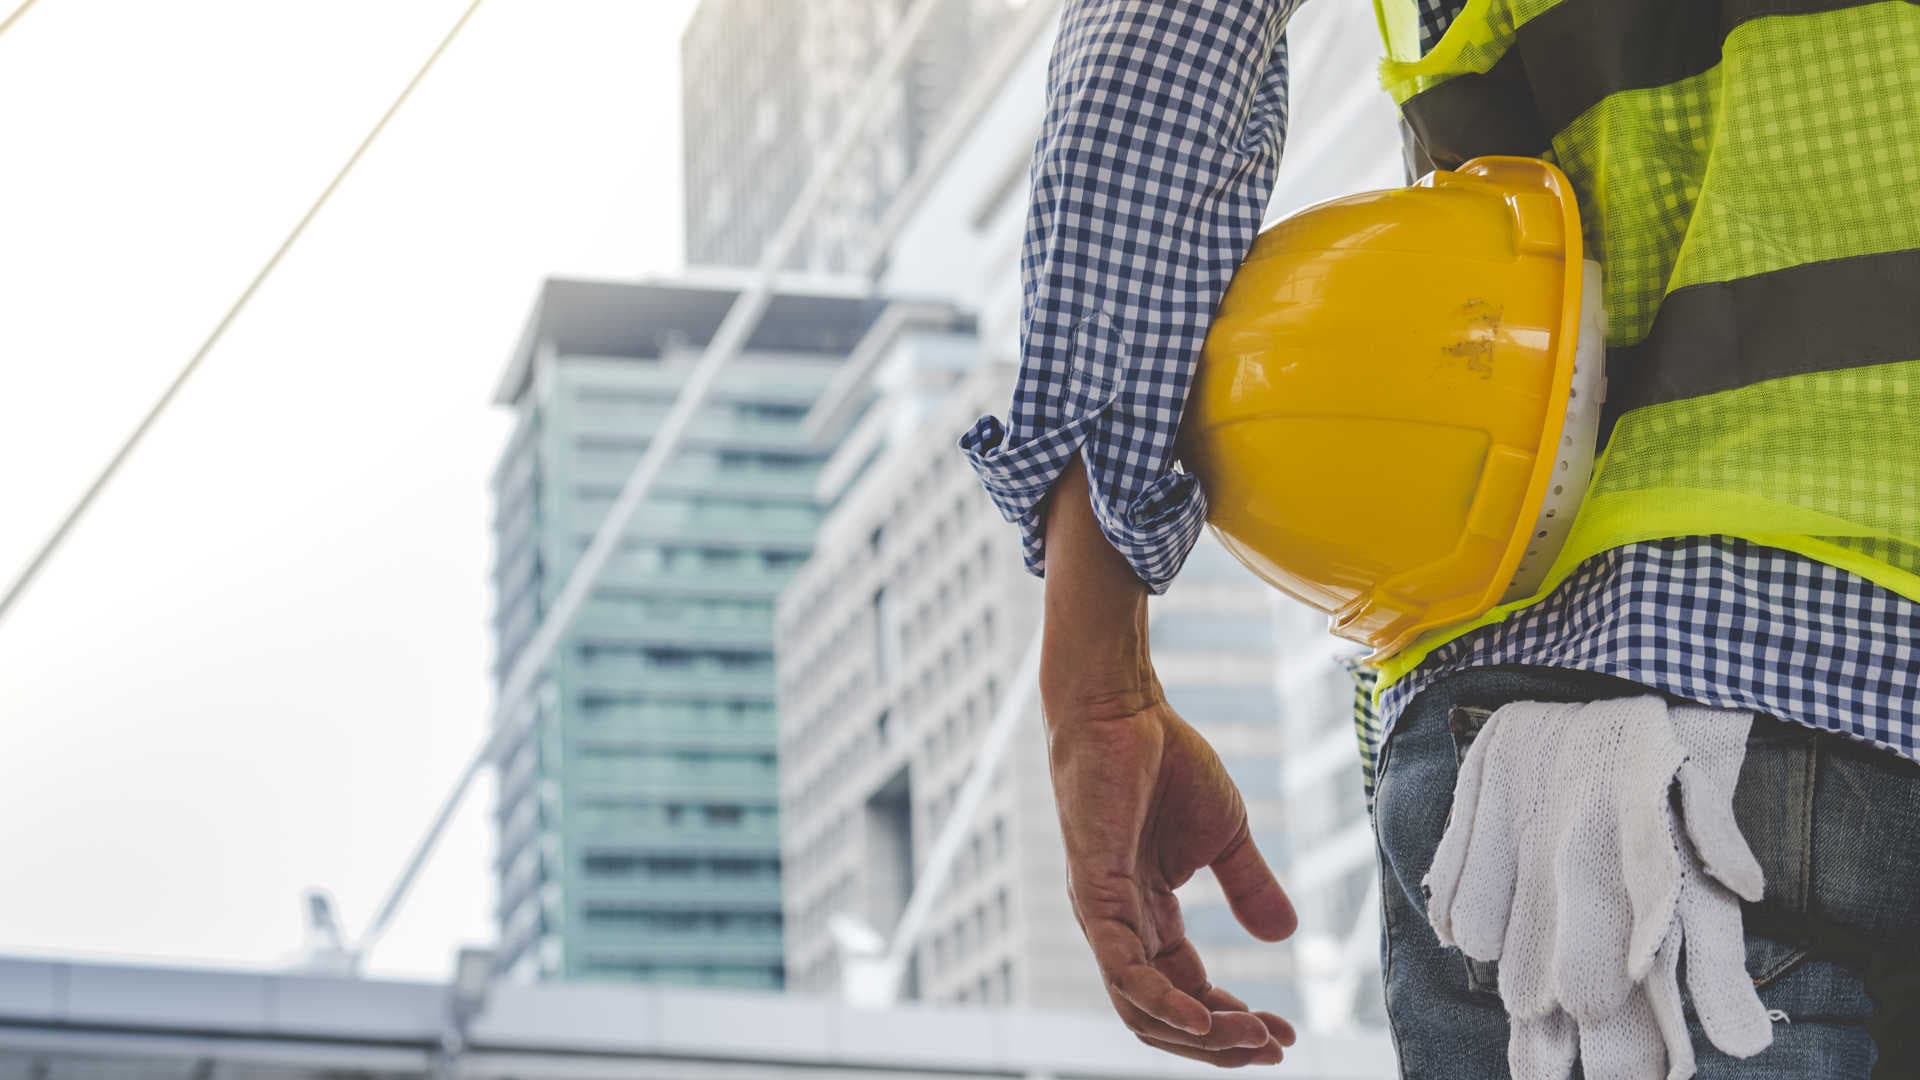 Best Civil Construction Company – Worker Overlooking Project With Helmet In Hand